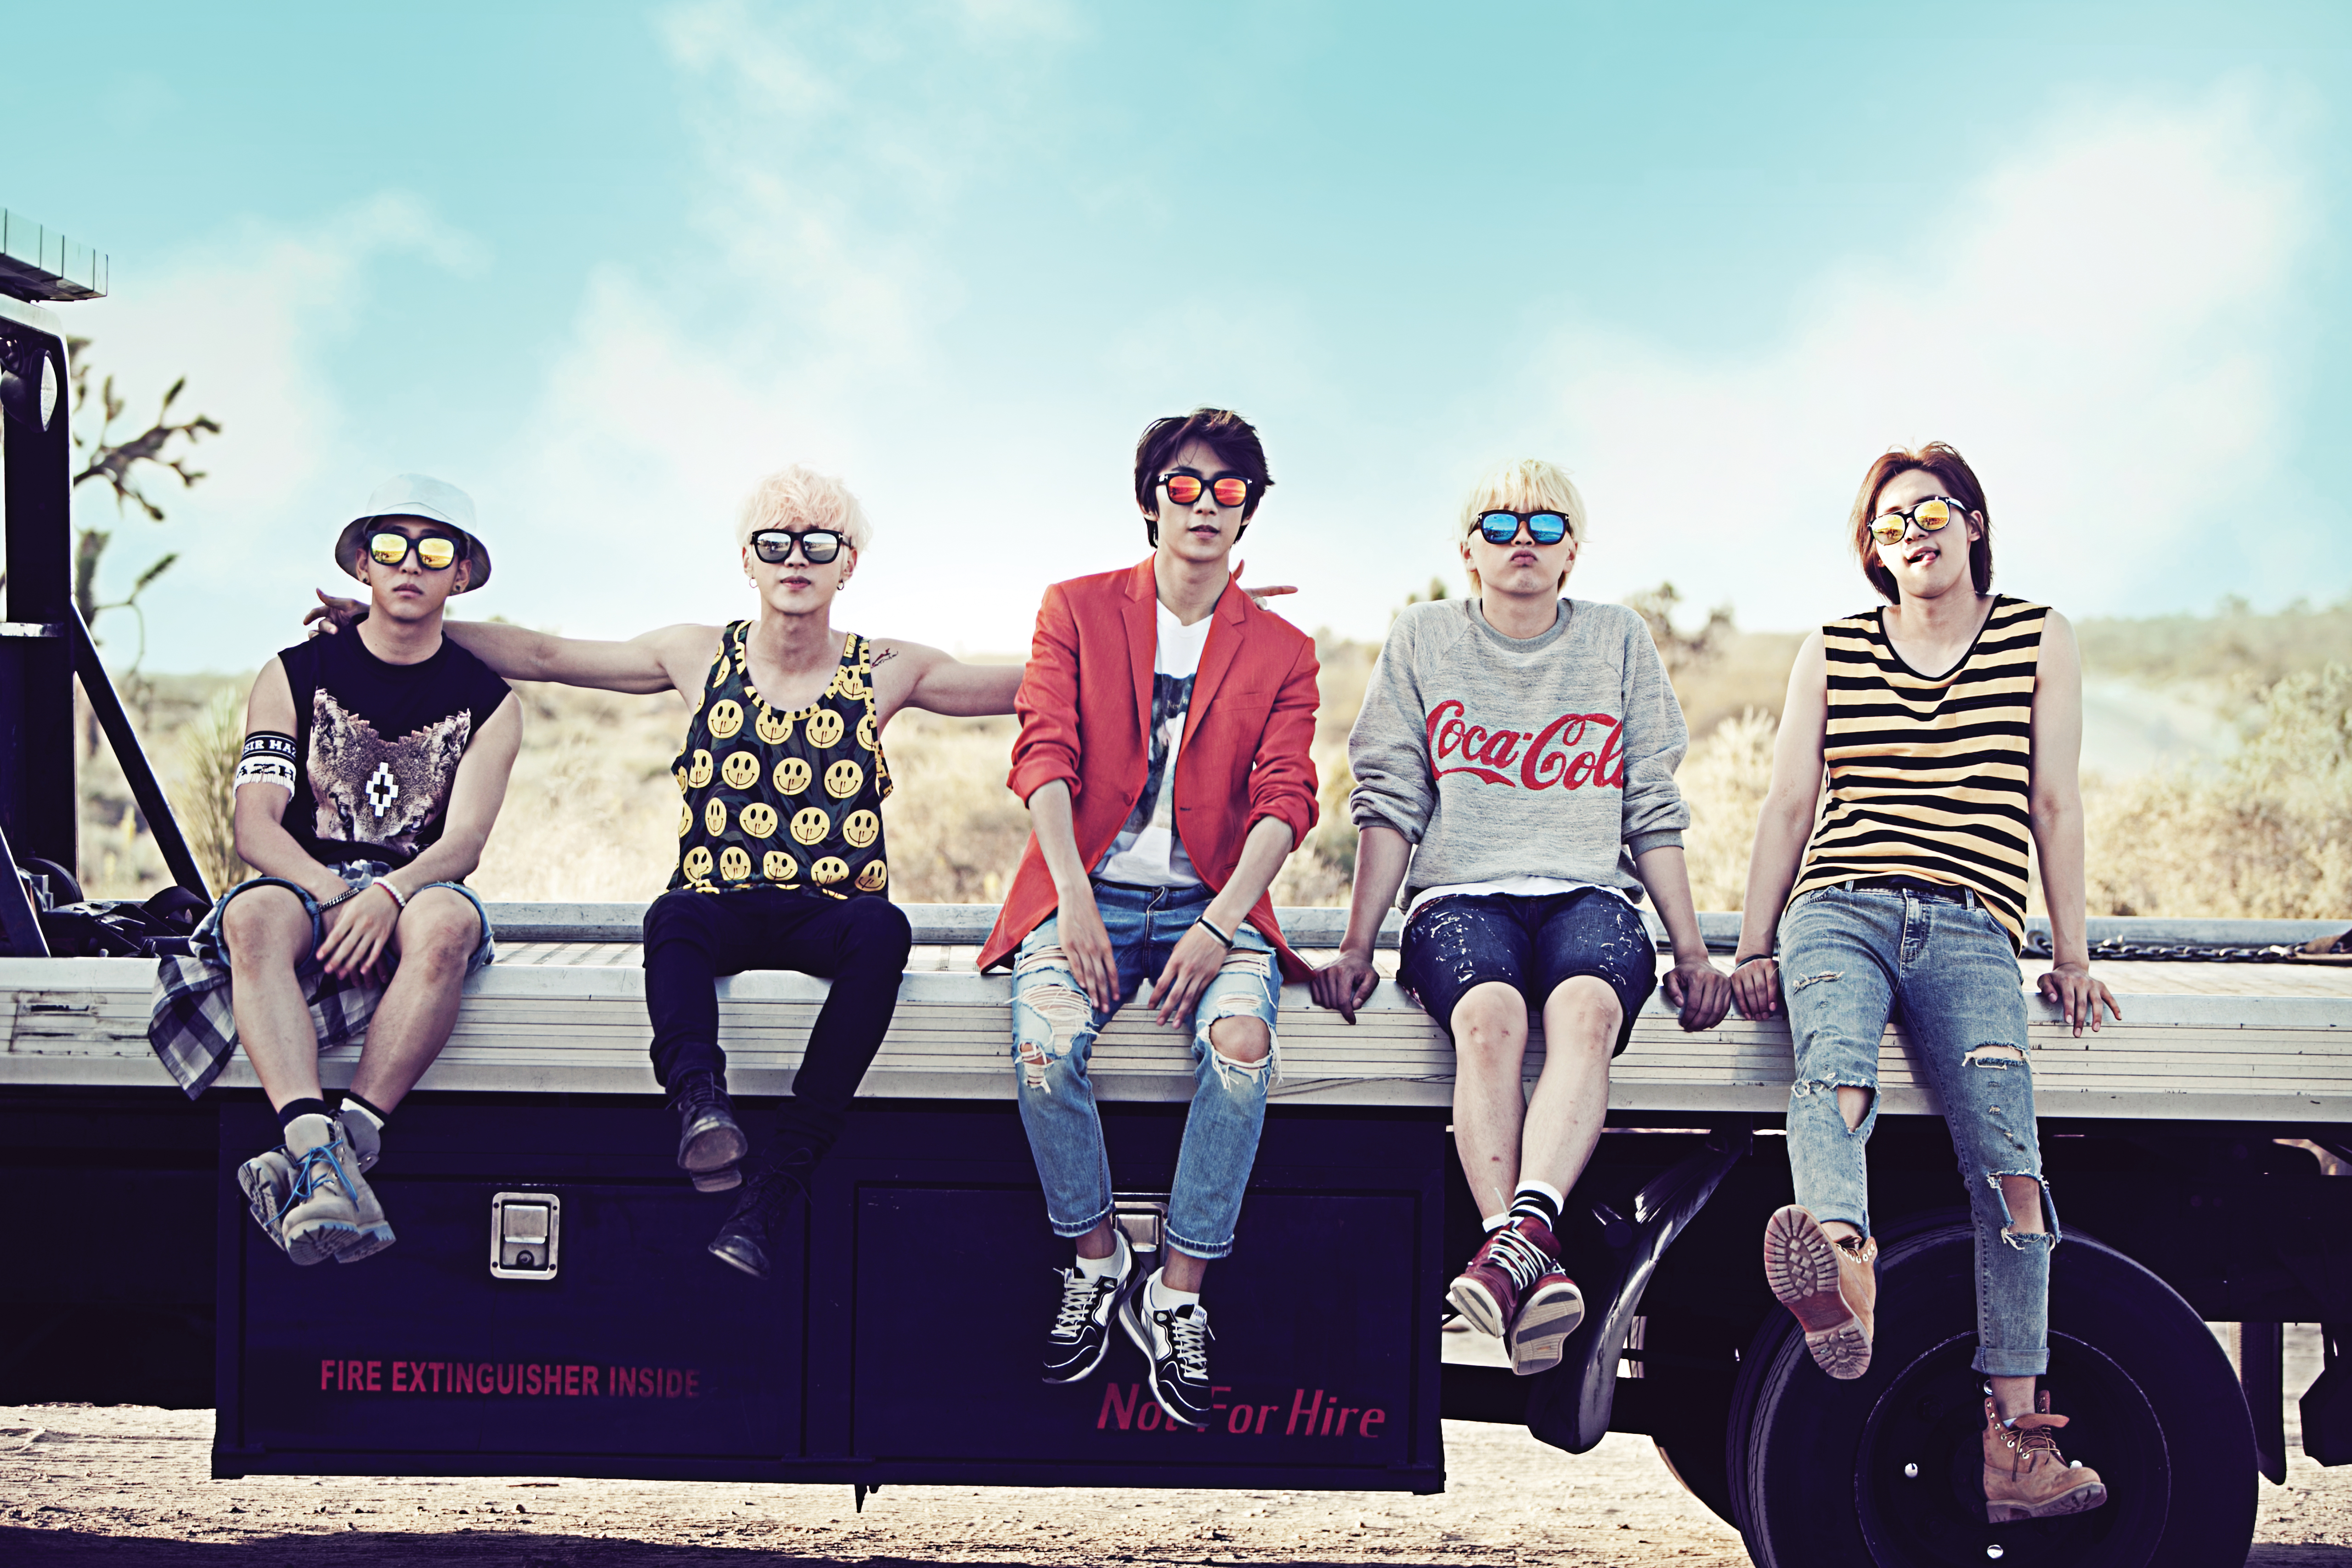 HQ B1A4 Wallpapers | File 8263.96Kb